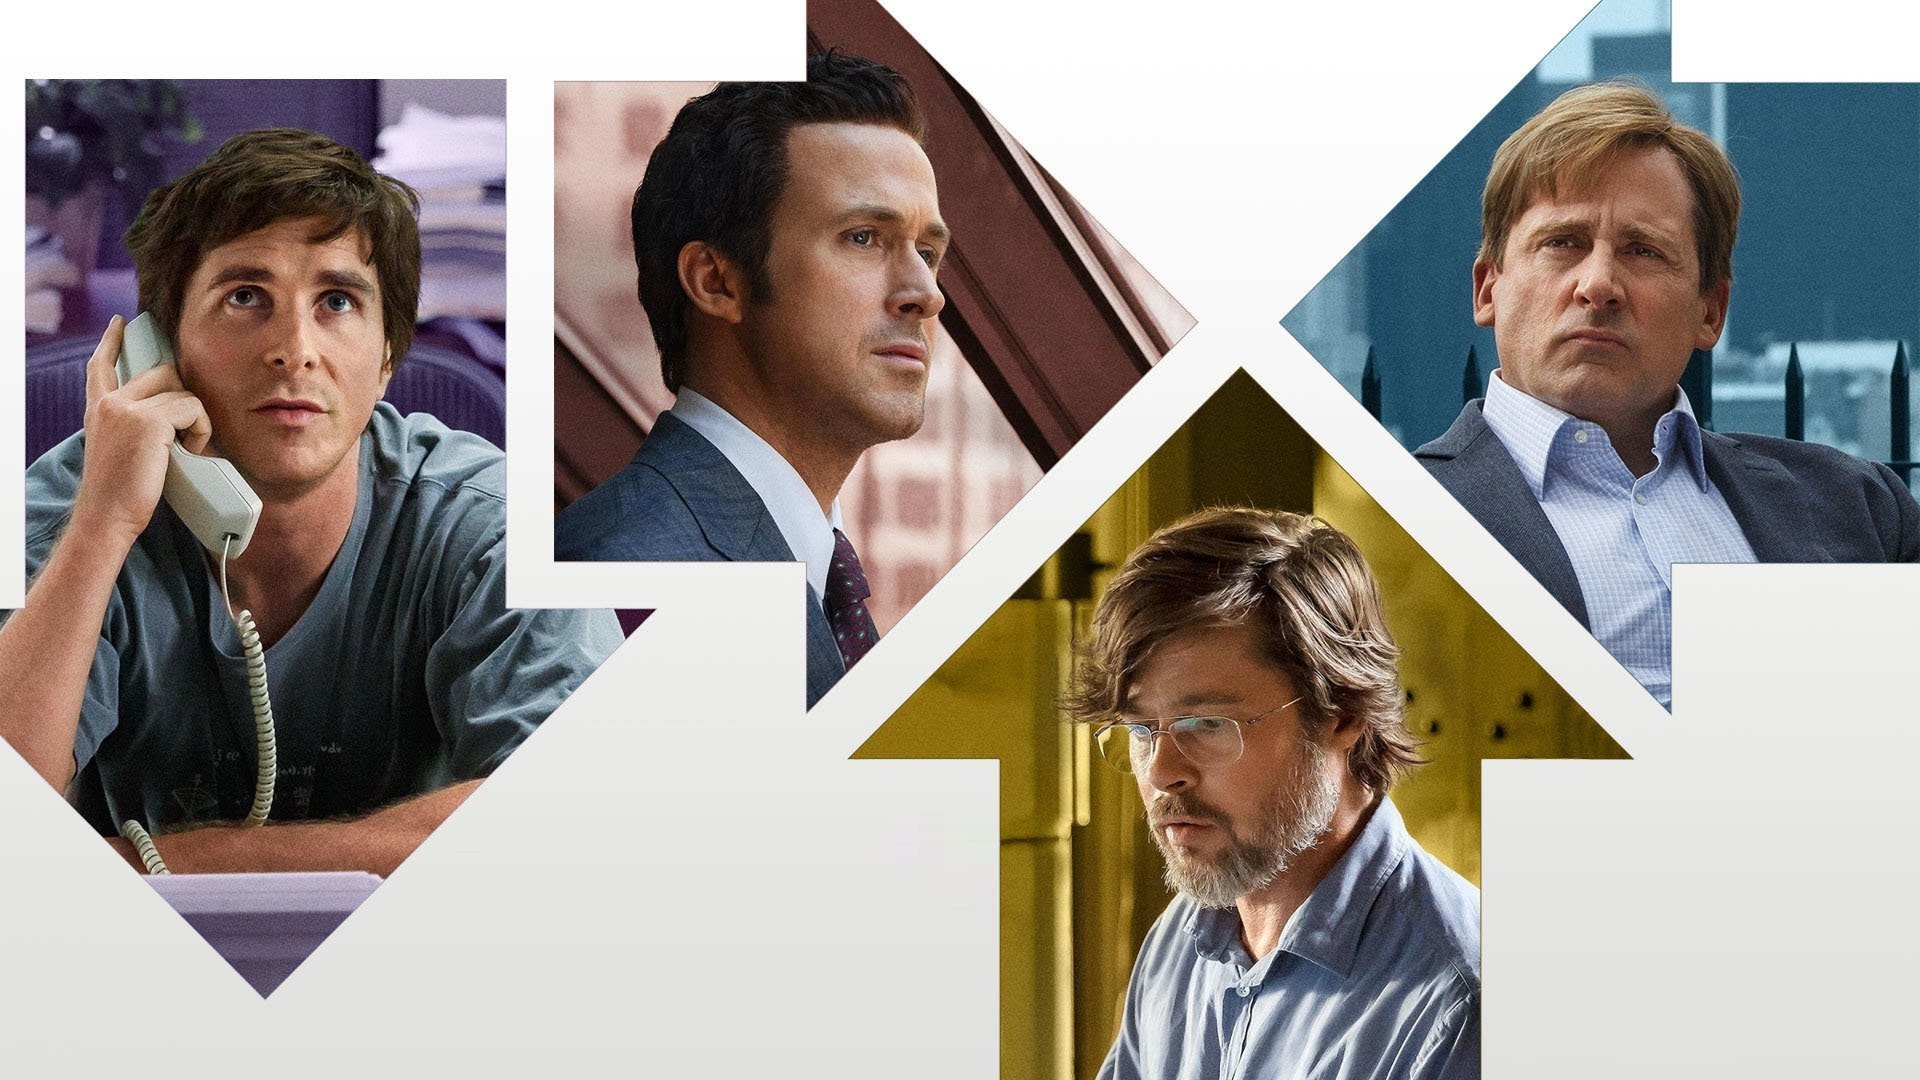 The Big Short: The film won the Academy Award for Best Adapted Screenplay. 1920x1080 Full HD Background.